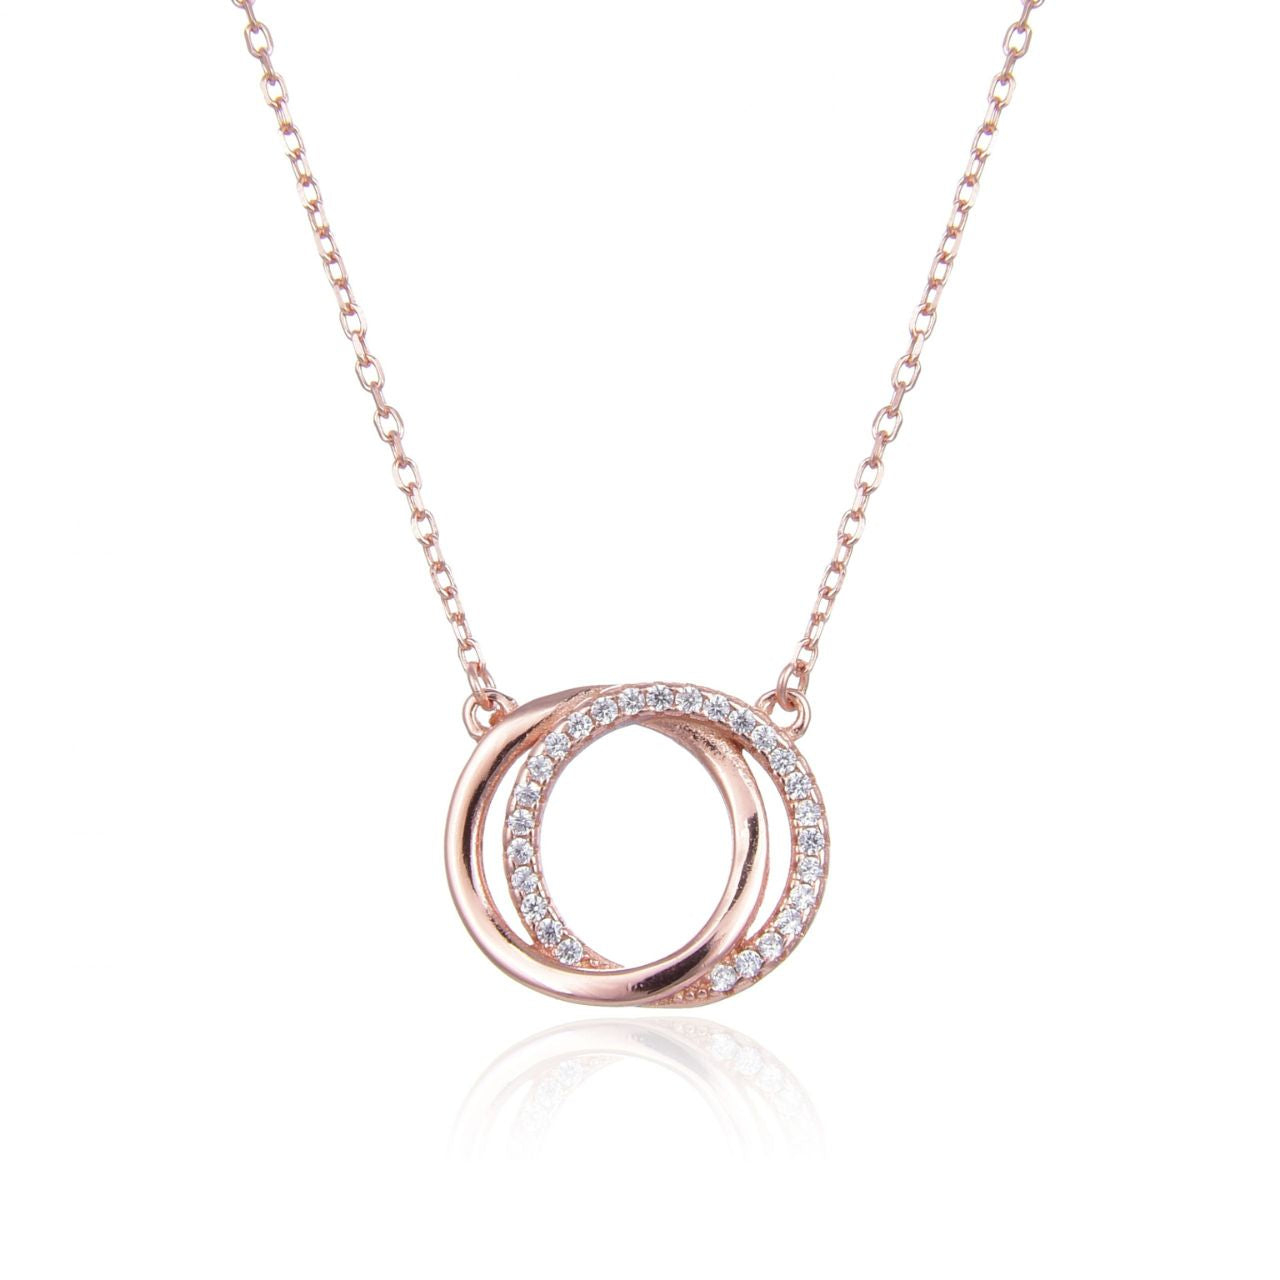 Rose Gold Interlocked Circle Necklace by Kilkenny Silver  Rose gold plated sterling silver interlocked circle necklace with cubic zirconia stones.